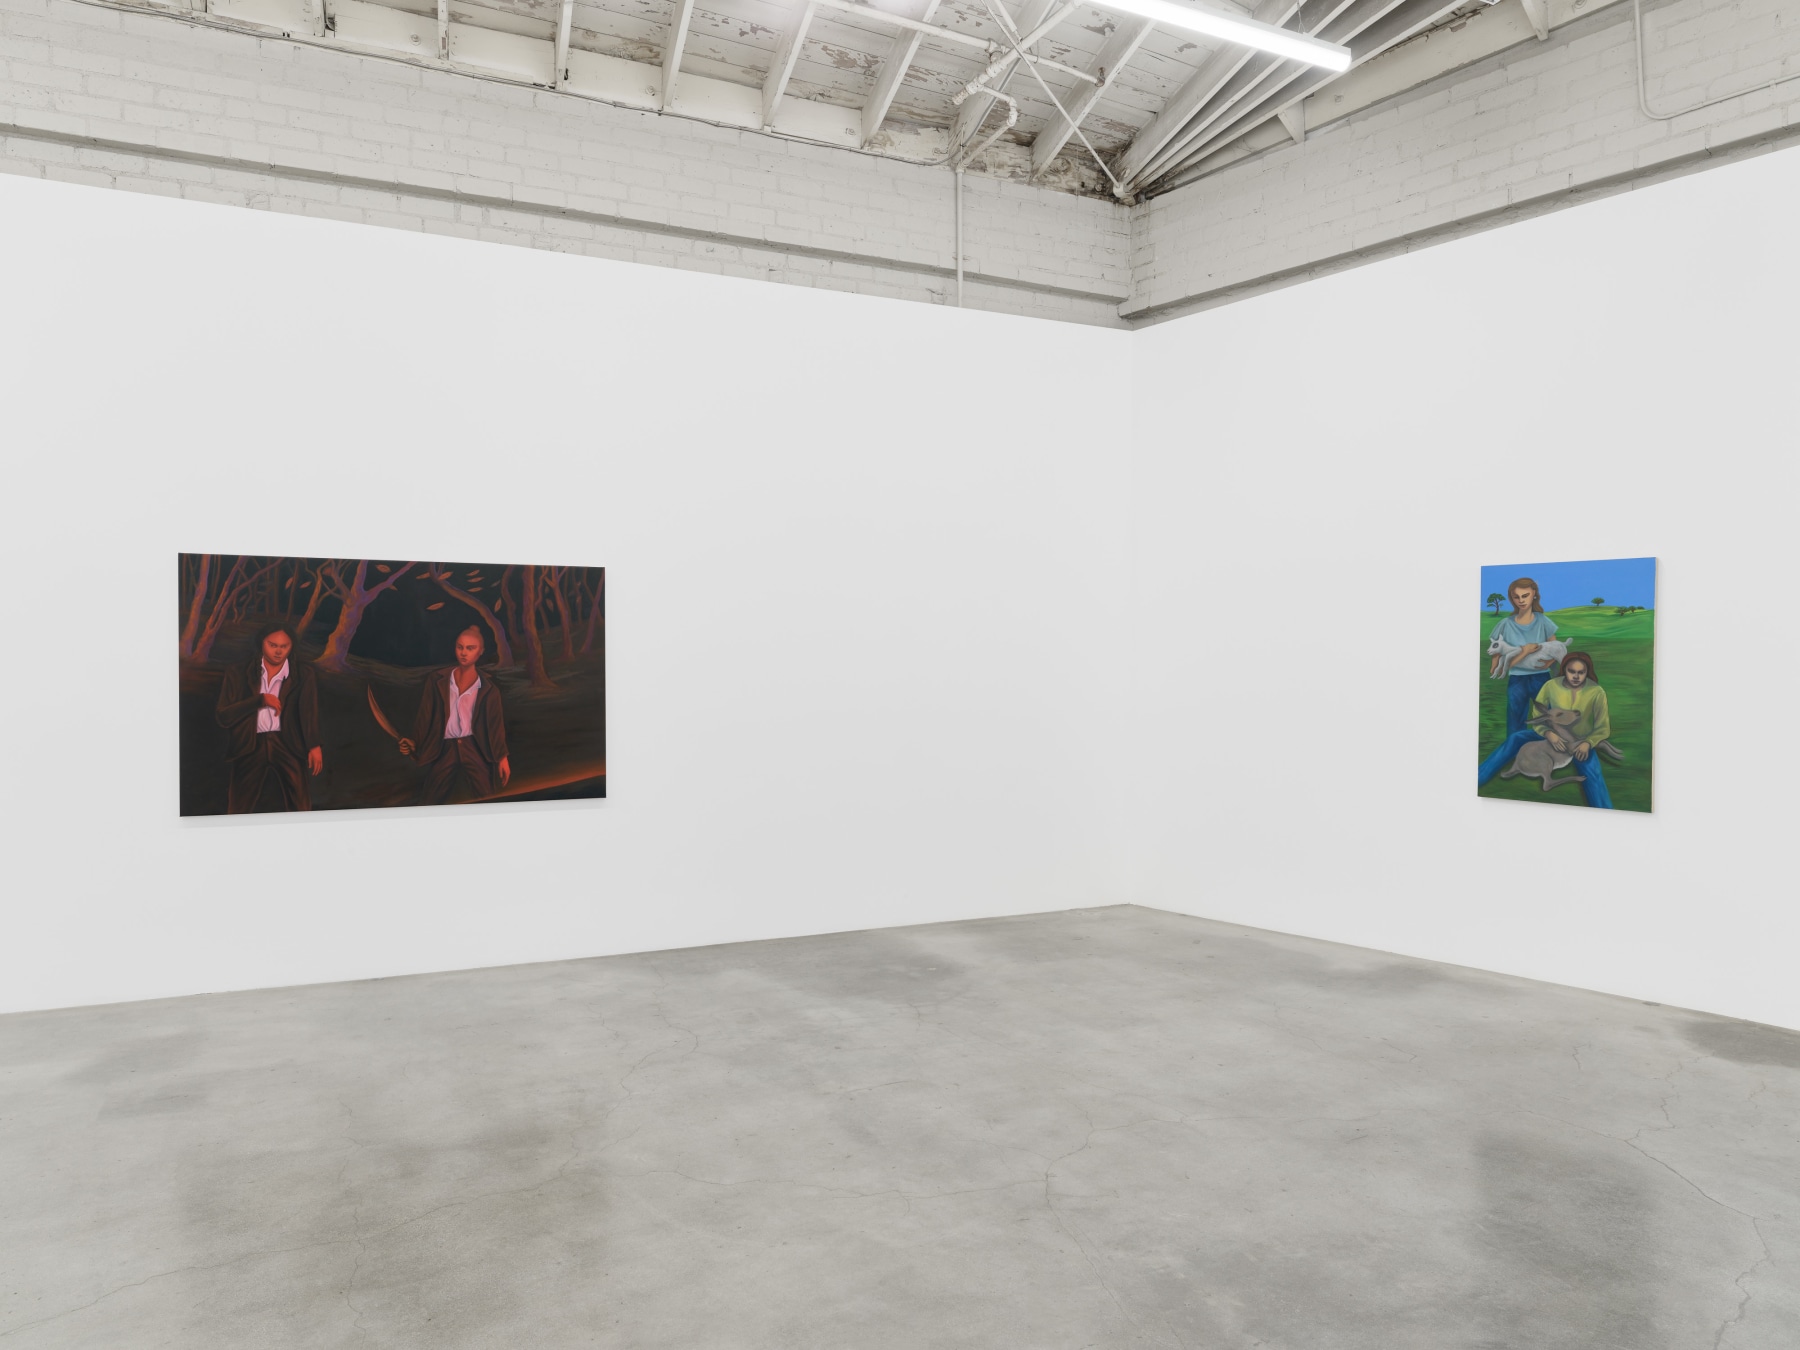 Installation view of Bambou Gili's "Goodbye Earl" at Night Gallery 2023